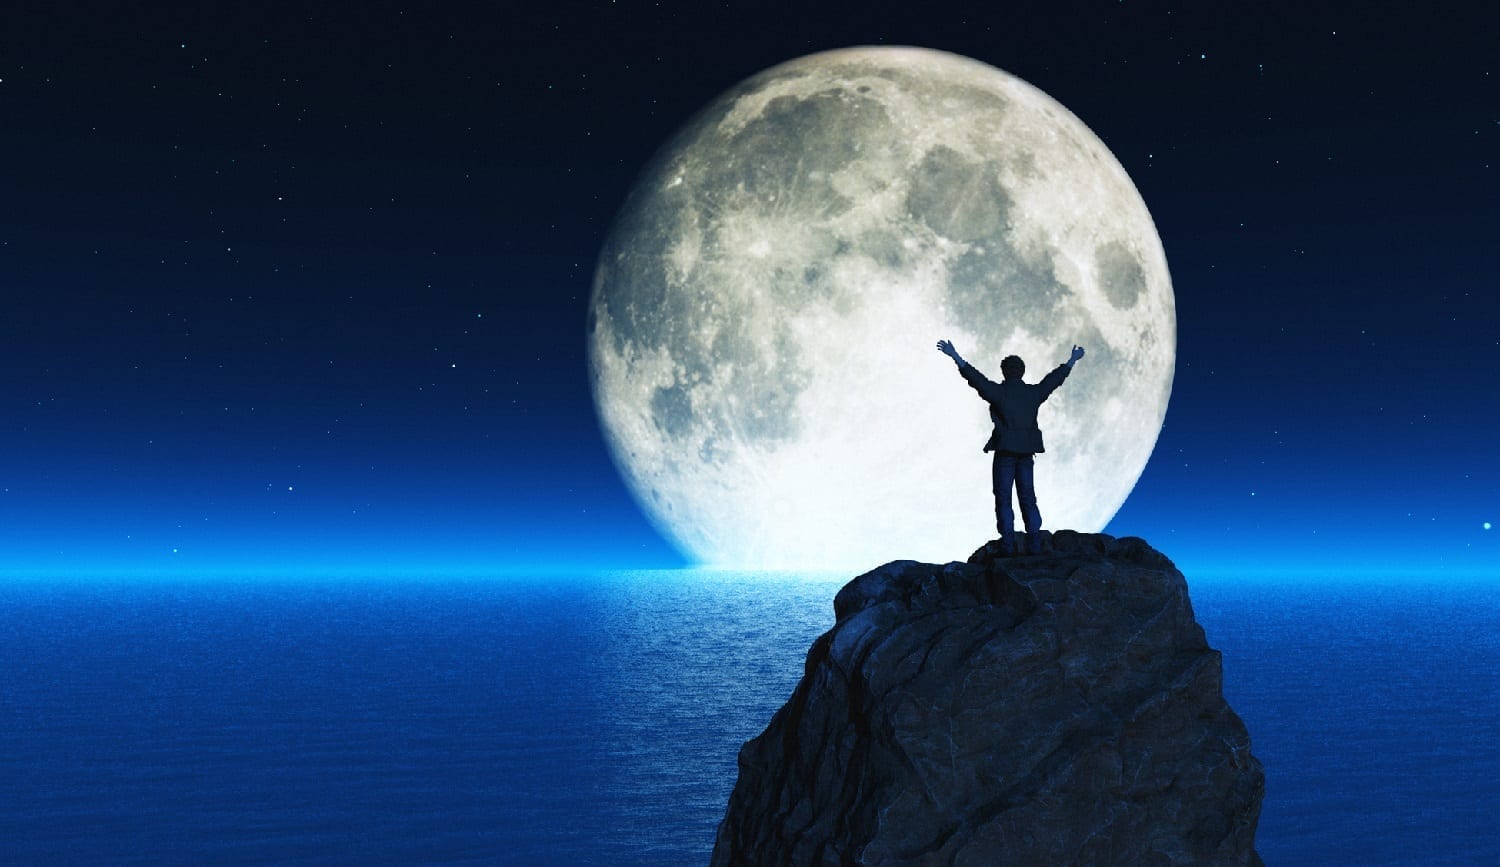 3D render of a man with hands upraised with the moon and water: ID 78449570 © Orlando Florin Rosu | Dreamstime.com